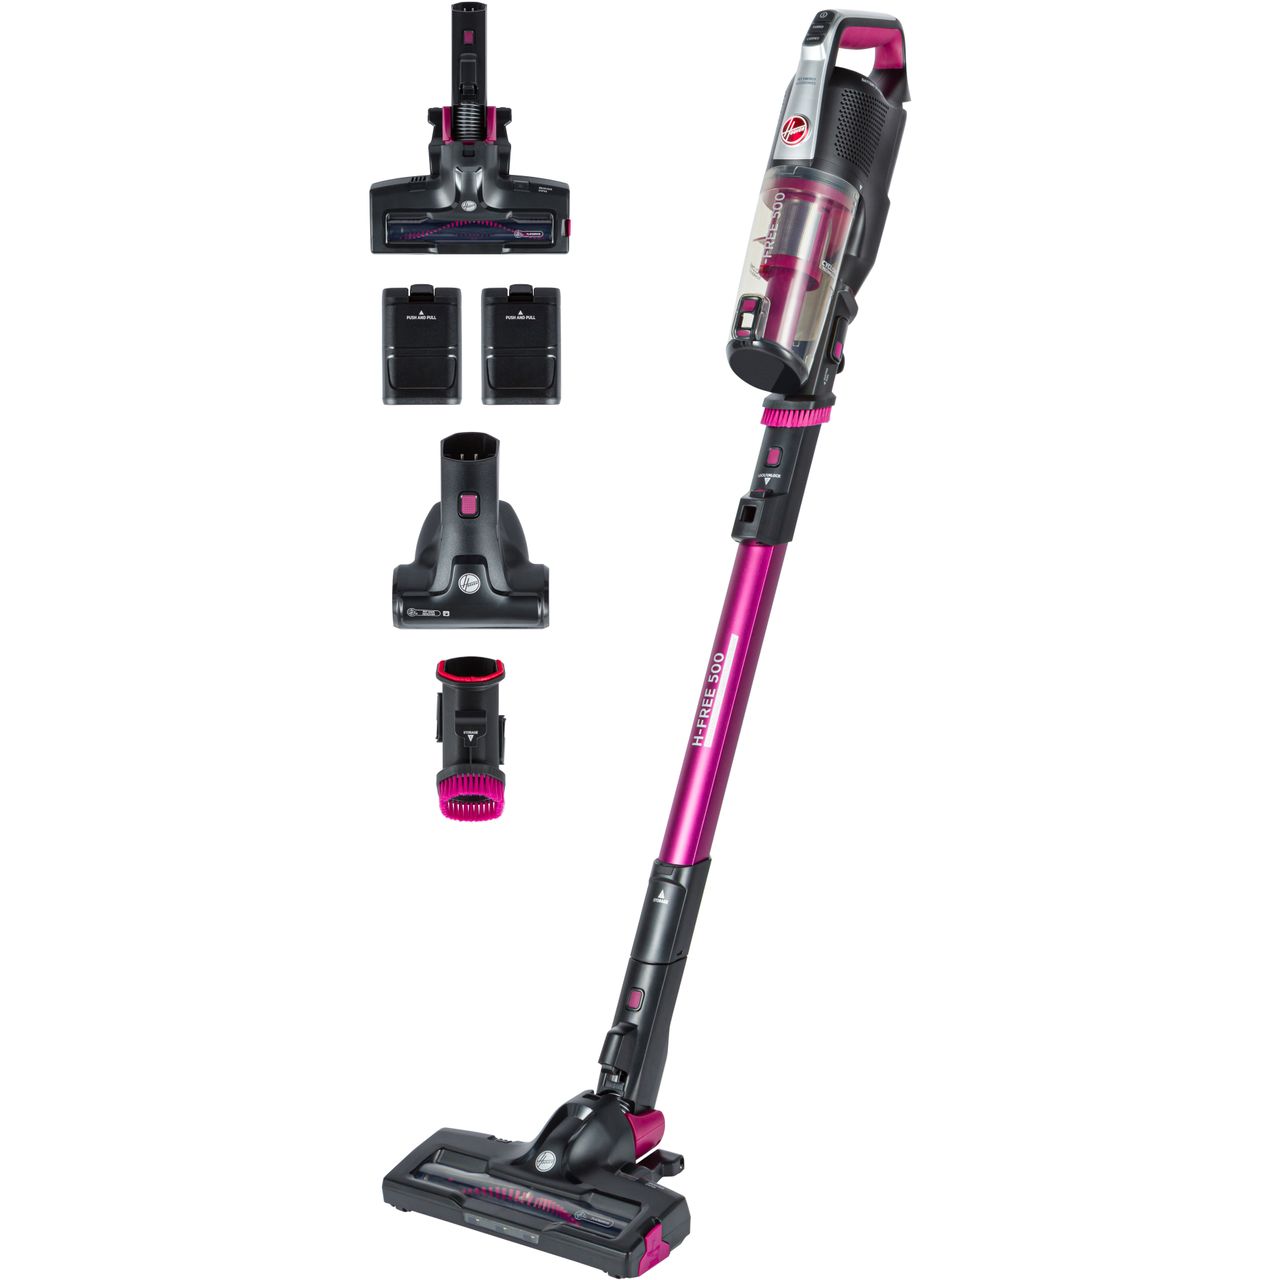 Hoover H-FREE 500 PETS ENERGY HF522PTE Cordless Vacuum Cleaner with Pet Hair Removal and up to 40 Minutes Run Time - Black / Pink